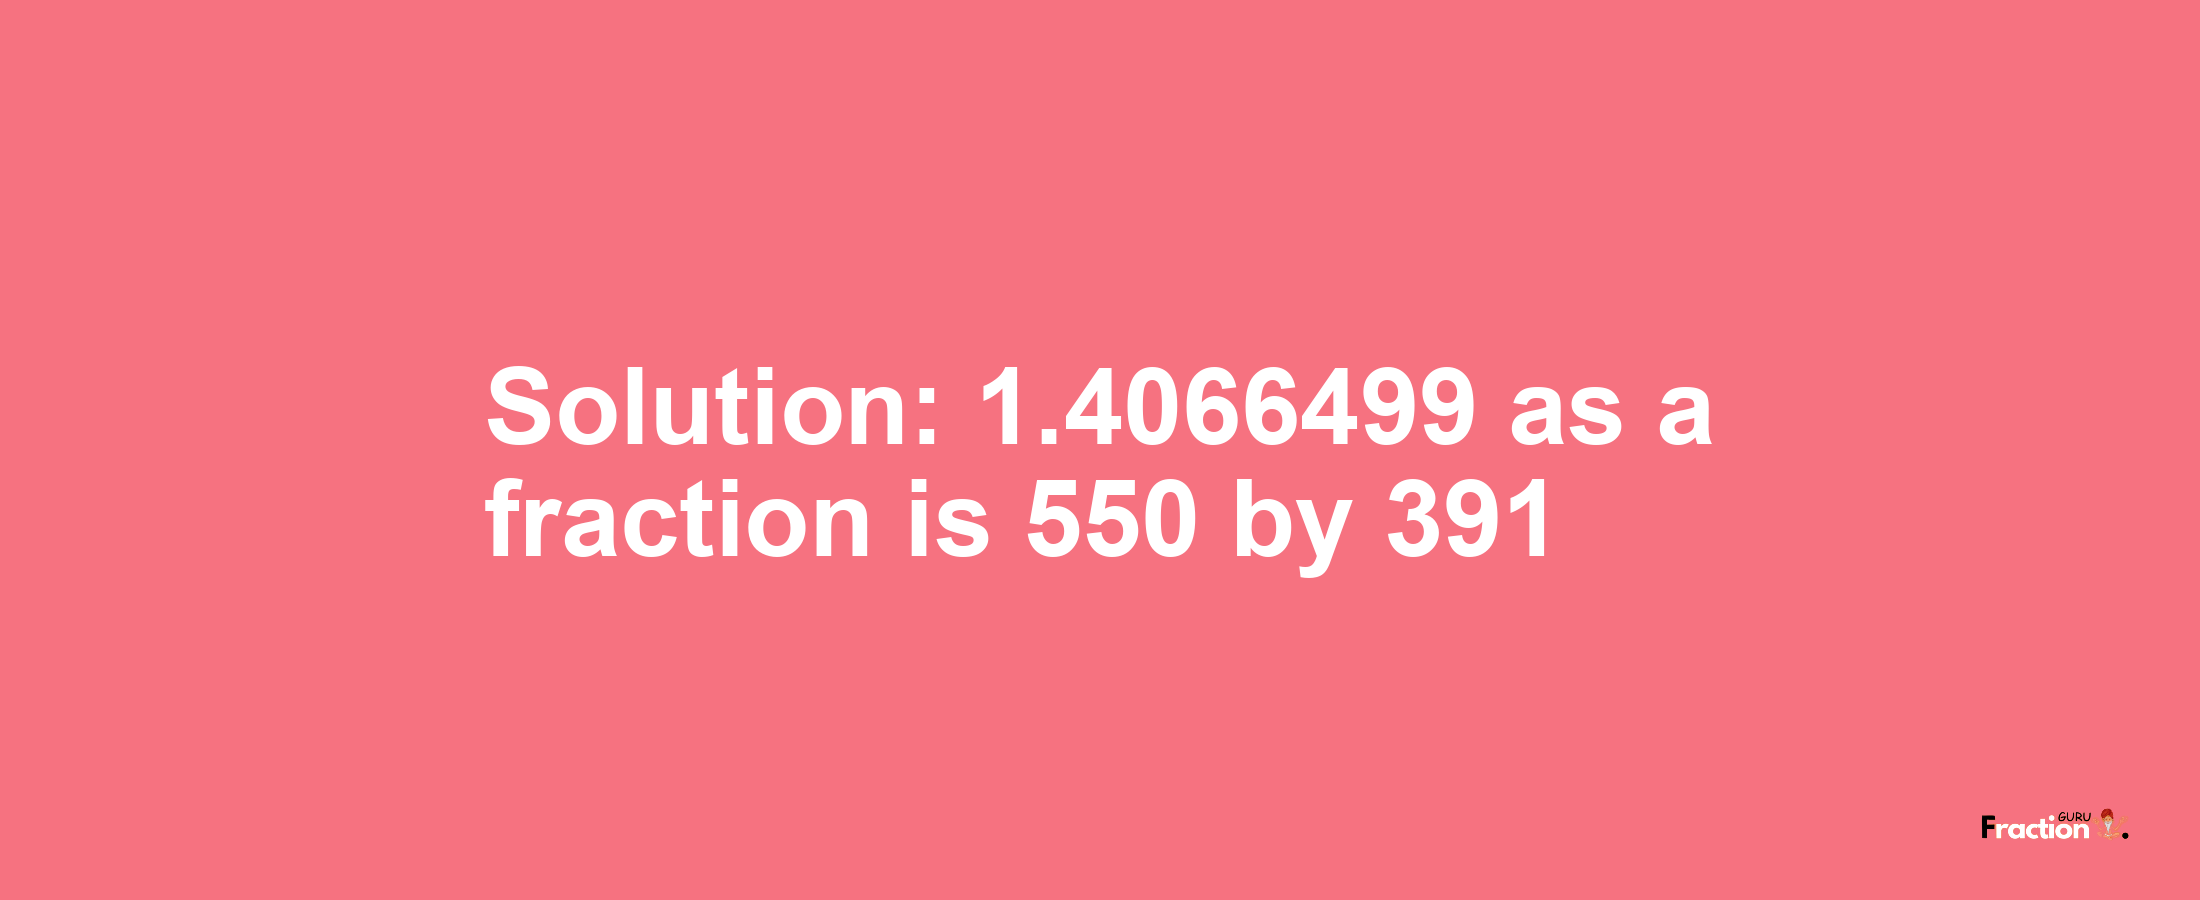 Solution:1.4066499 as a fraction is 550/391